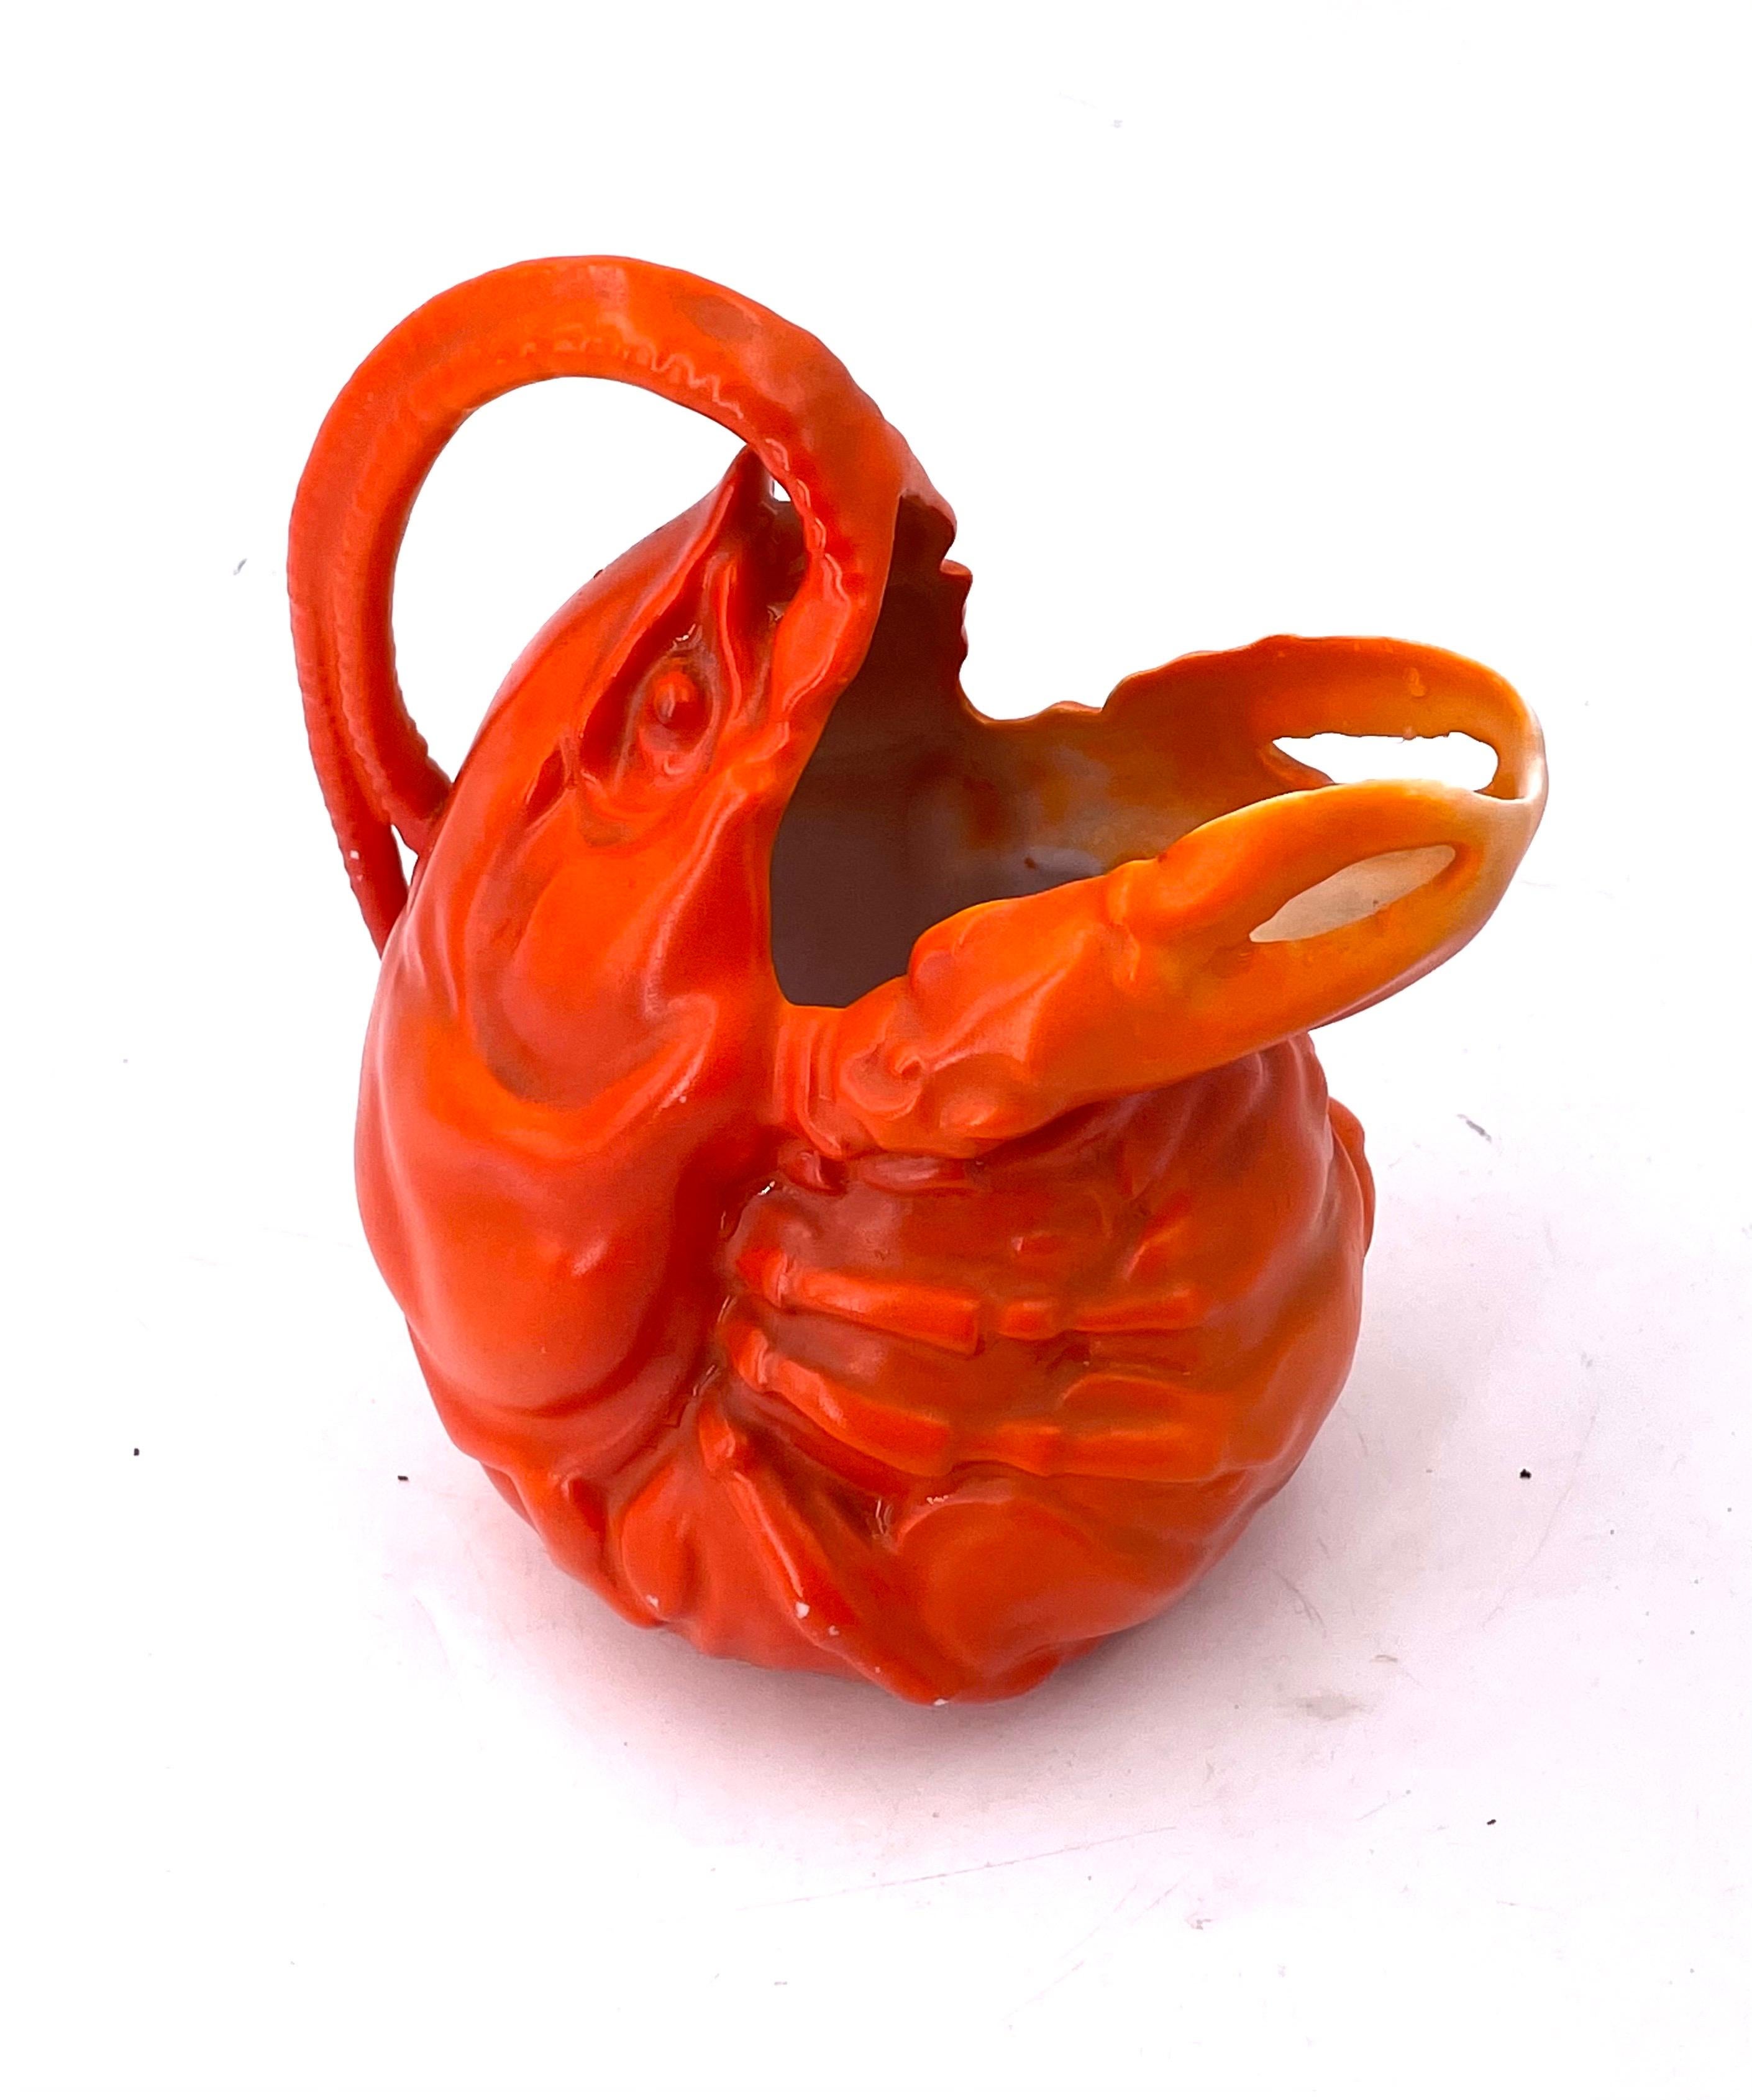 Rare well done antique fine porcelain lobster creamer circa the 1940s. No chips or cracks.